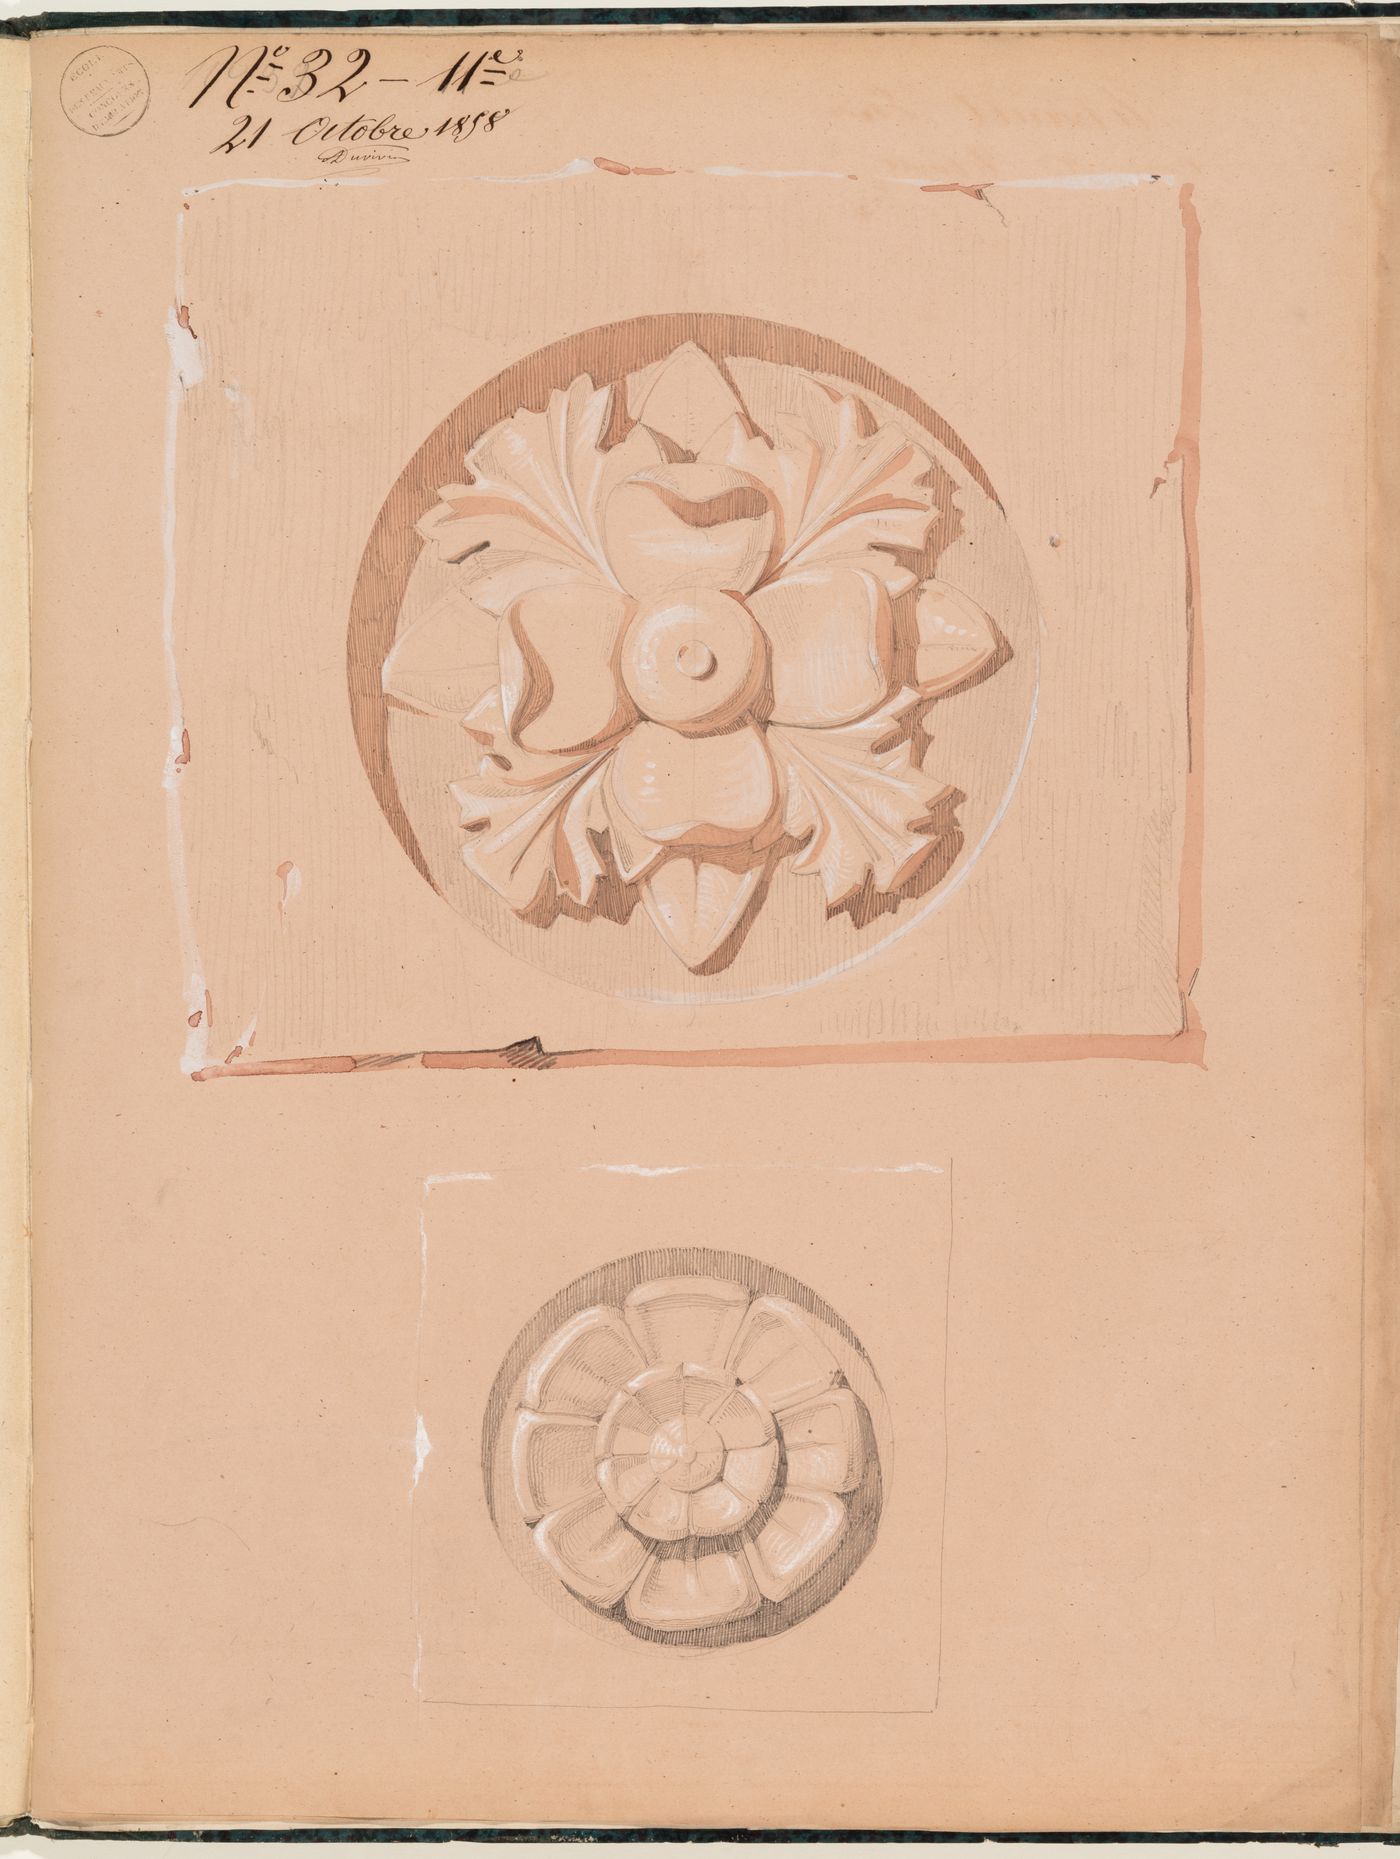 Concours d'émulation entry, 21 October 1858: Studies of a rosette and a patera